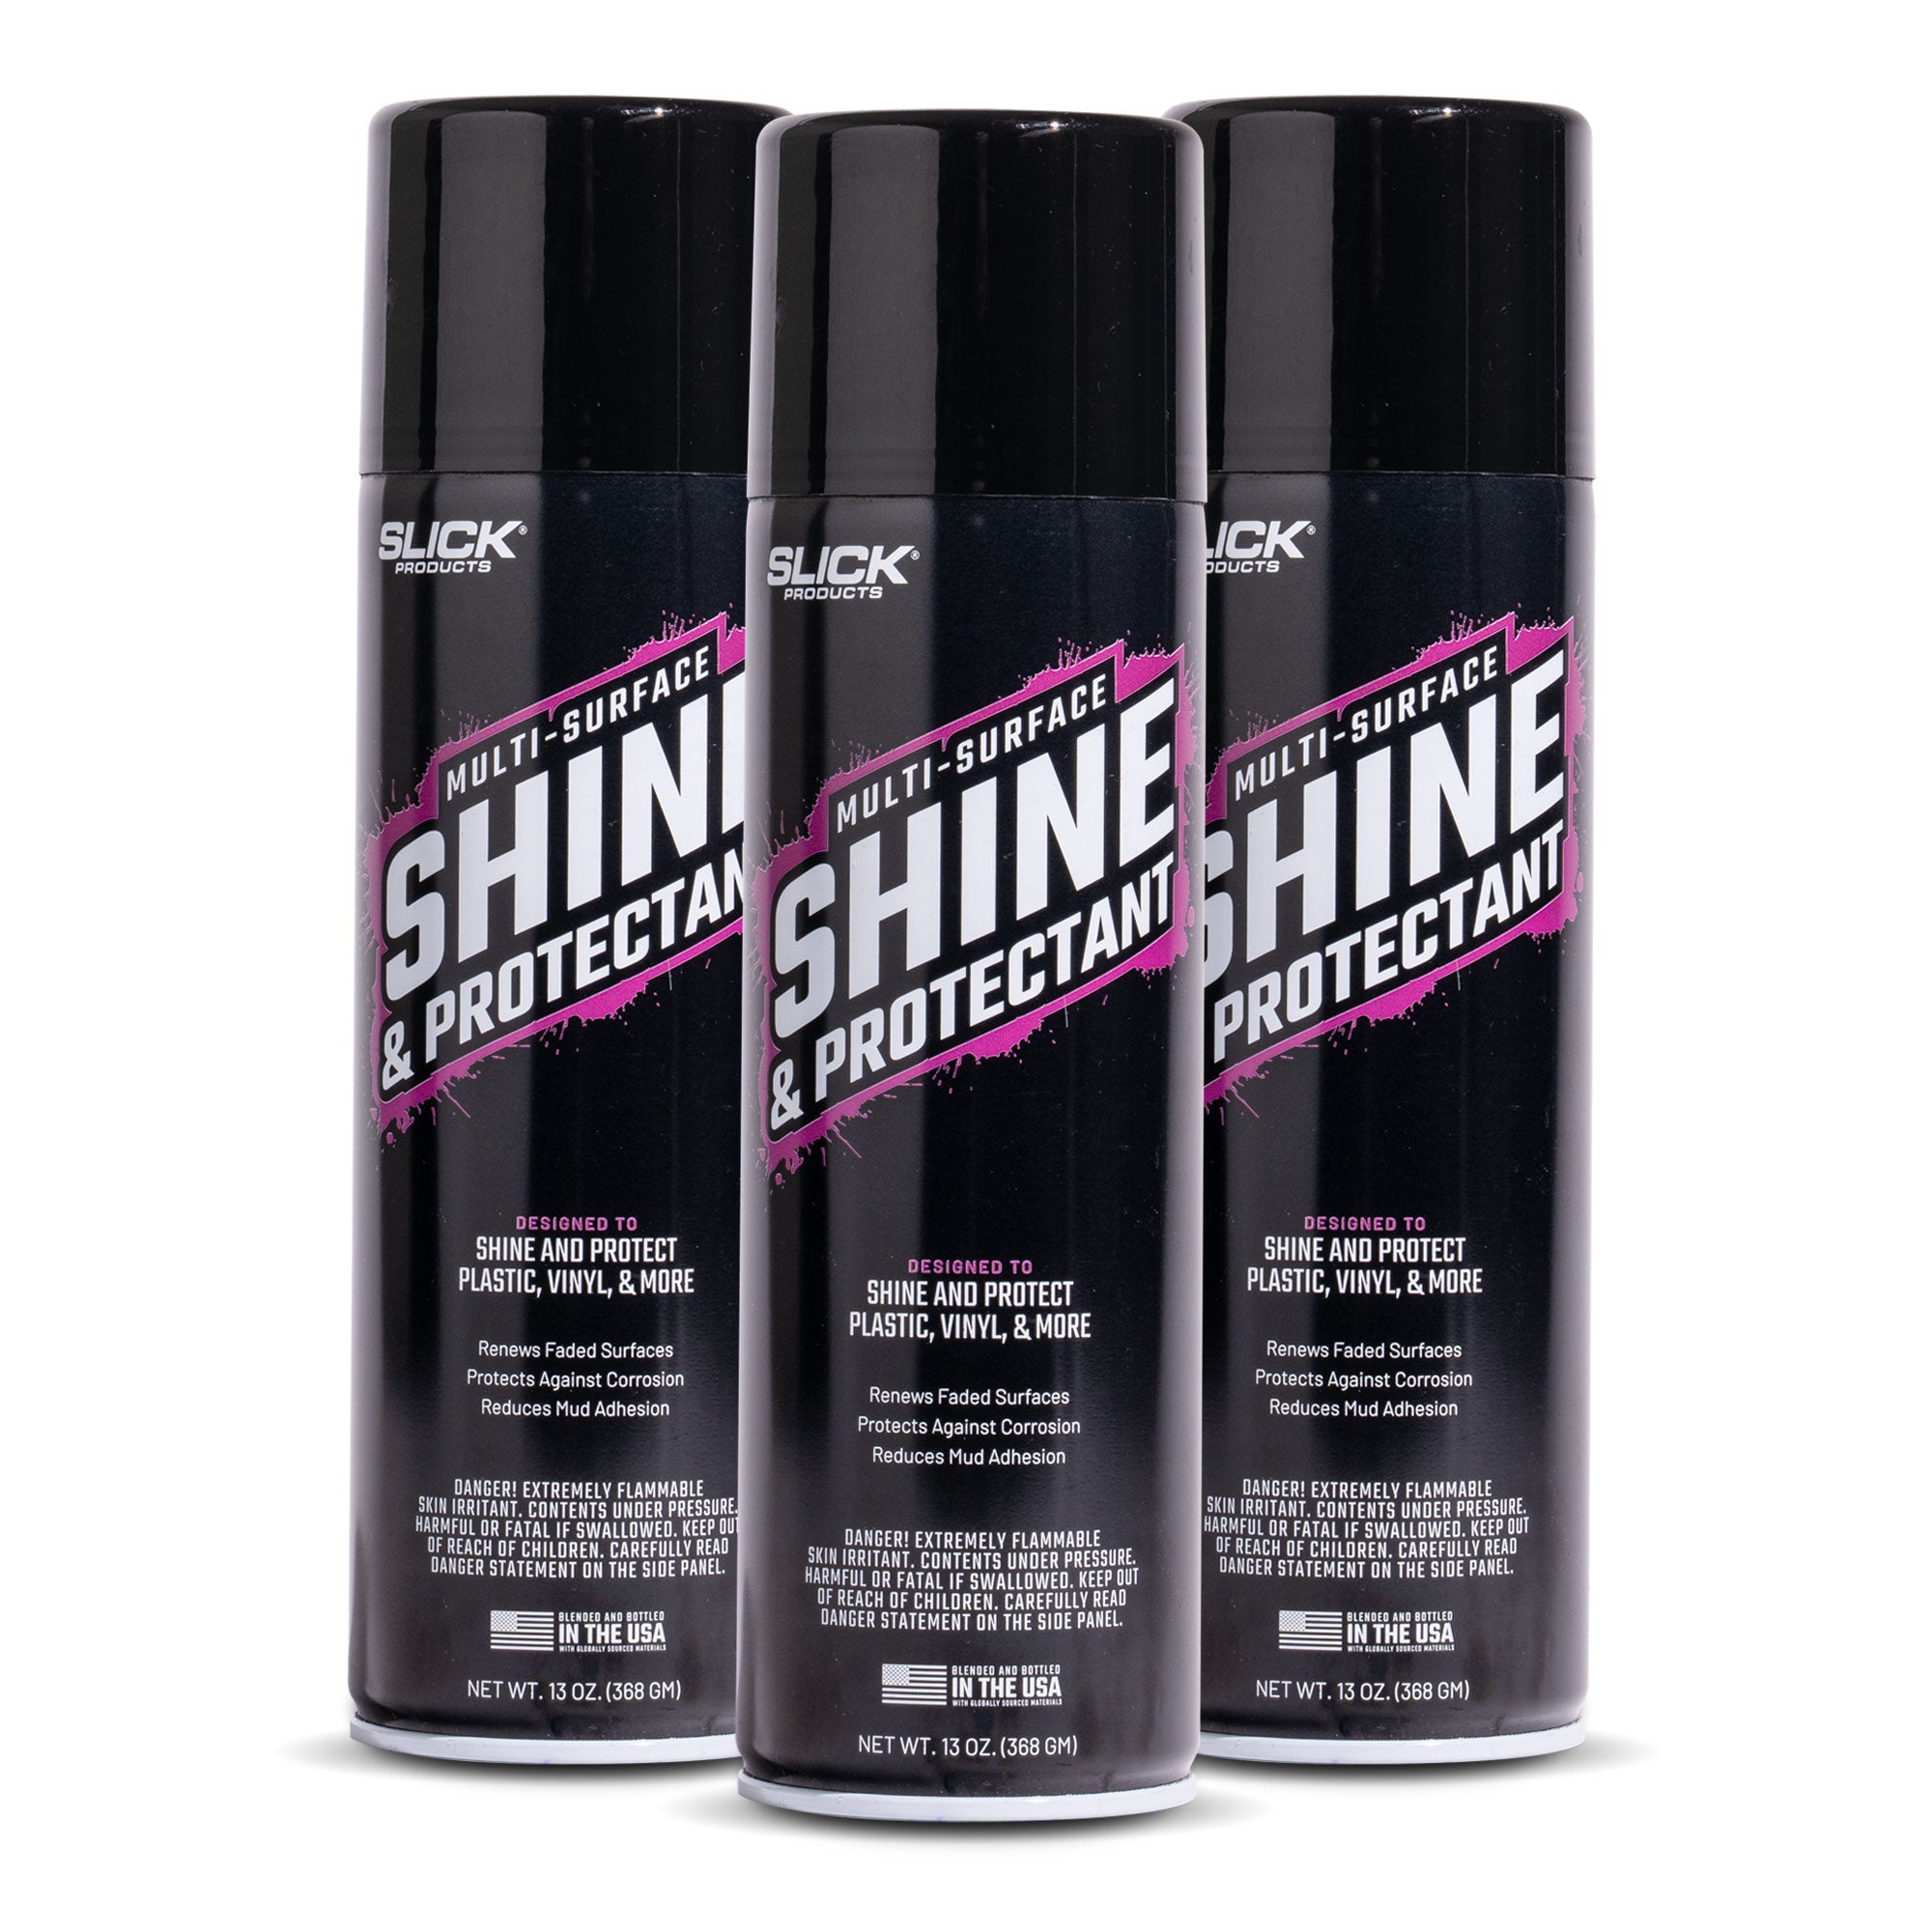 Shine & Protectant - Special Offer